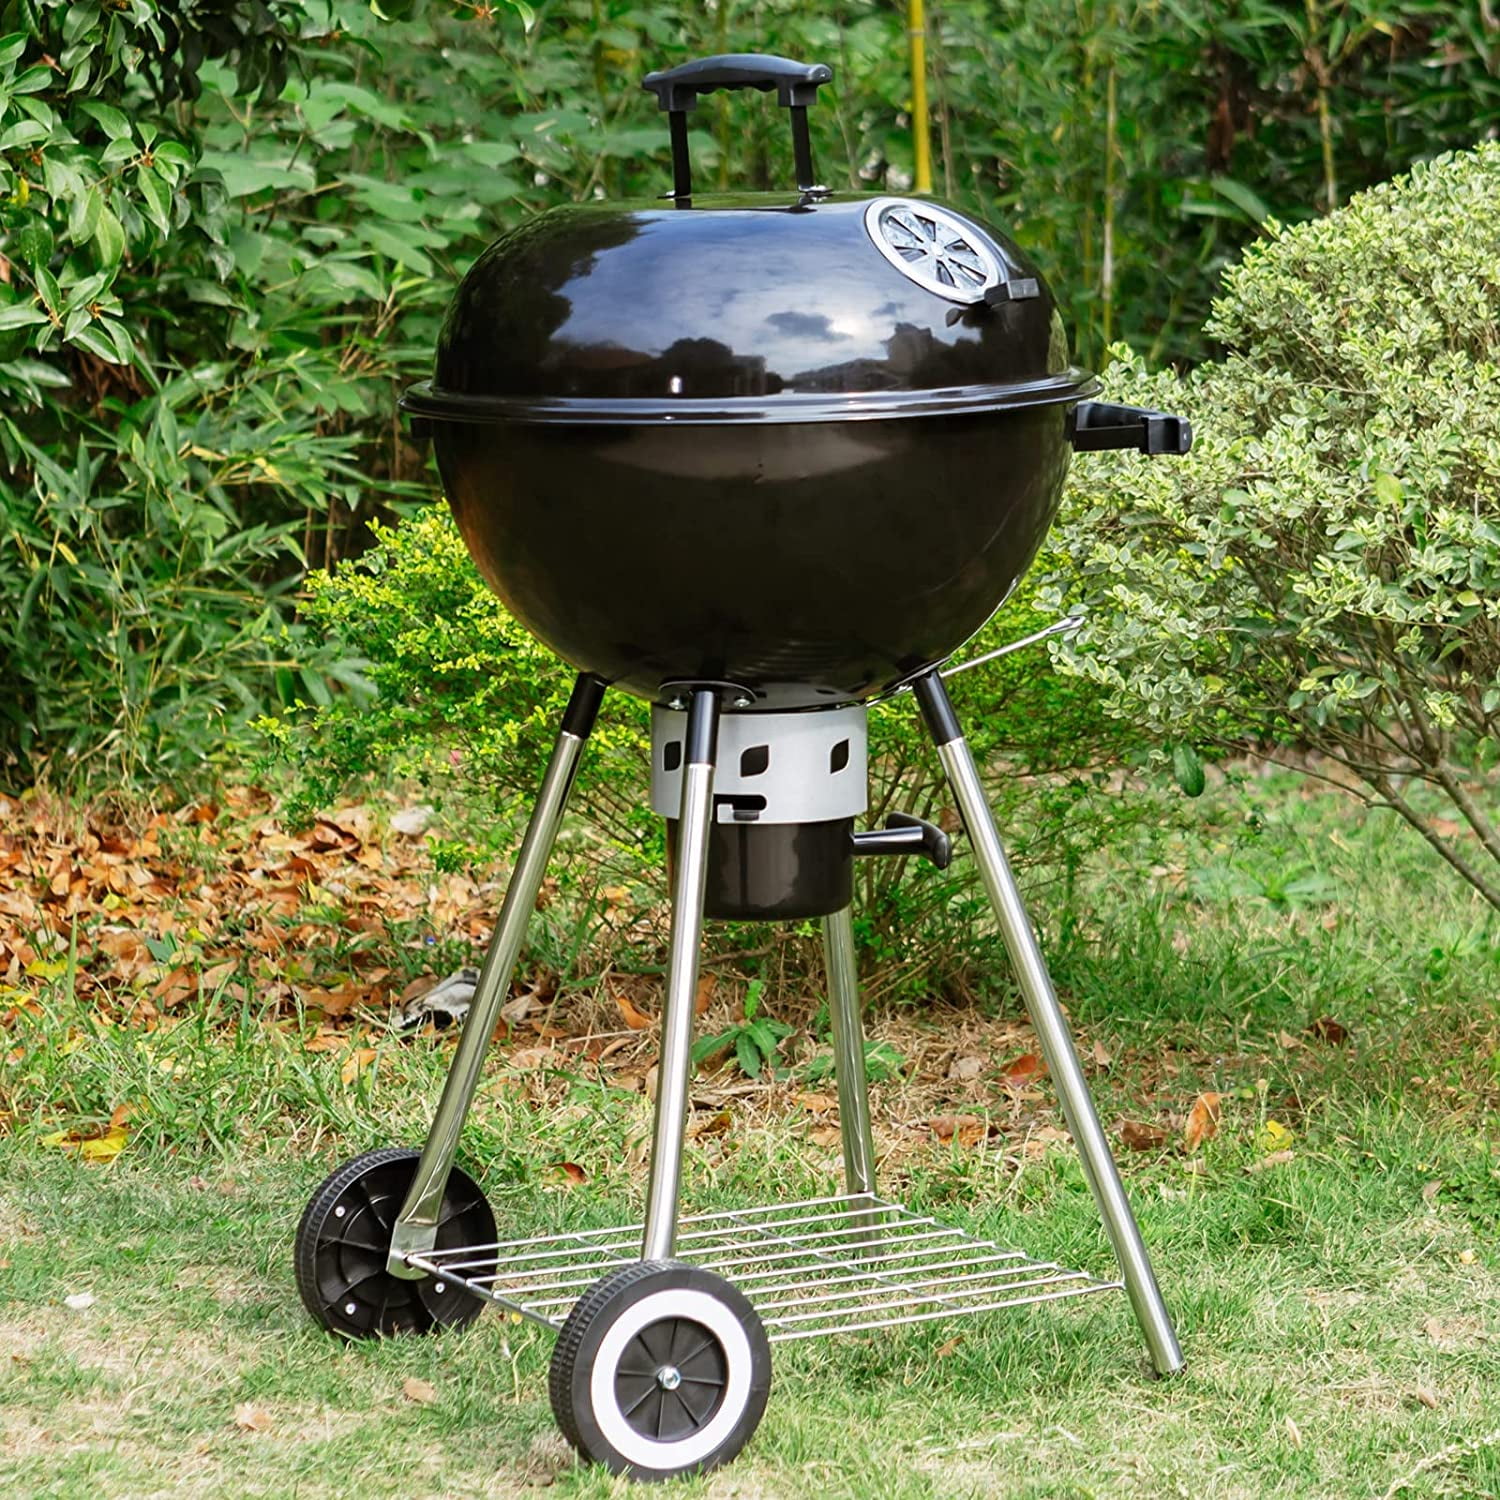 Bentism 21 inch Kettle Charcoal Grill BBQ Portable Grill with Cart Outdoor Cooking, Size: 21x21 inch / 54x54 cm